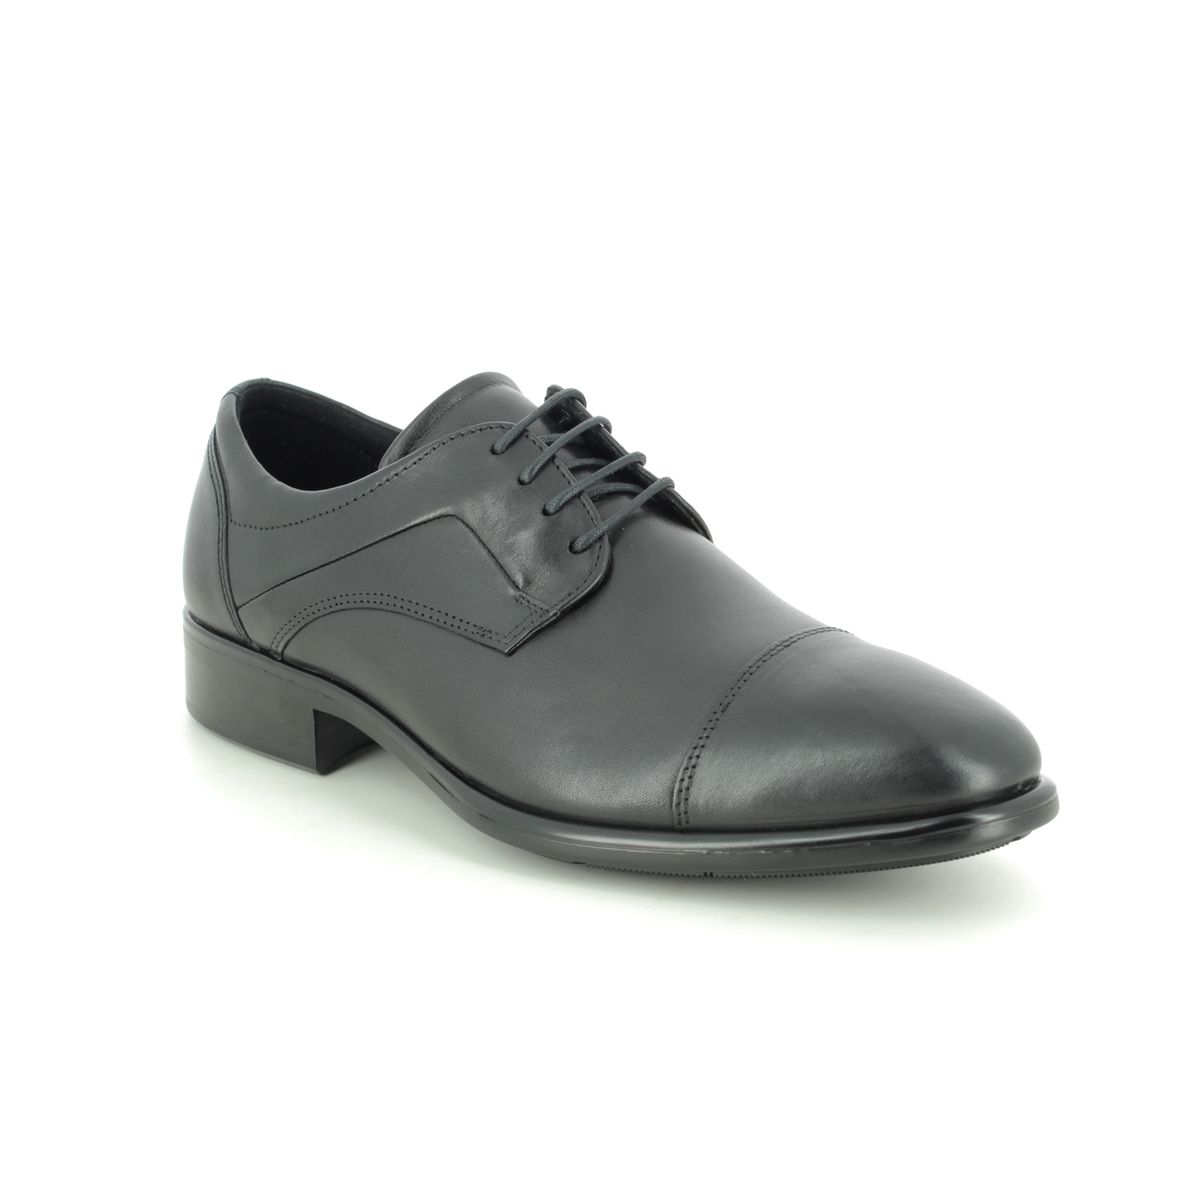 Ecco Citytray Black Leather Mens Formal Shoes 512704-01001 In Size 43 In Plain Black Leather